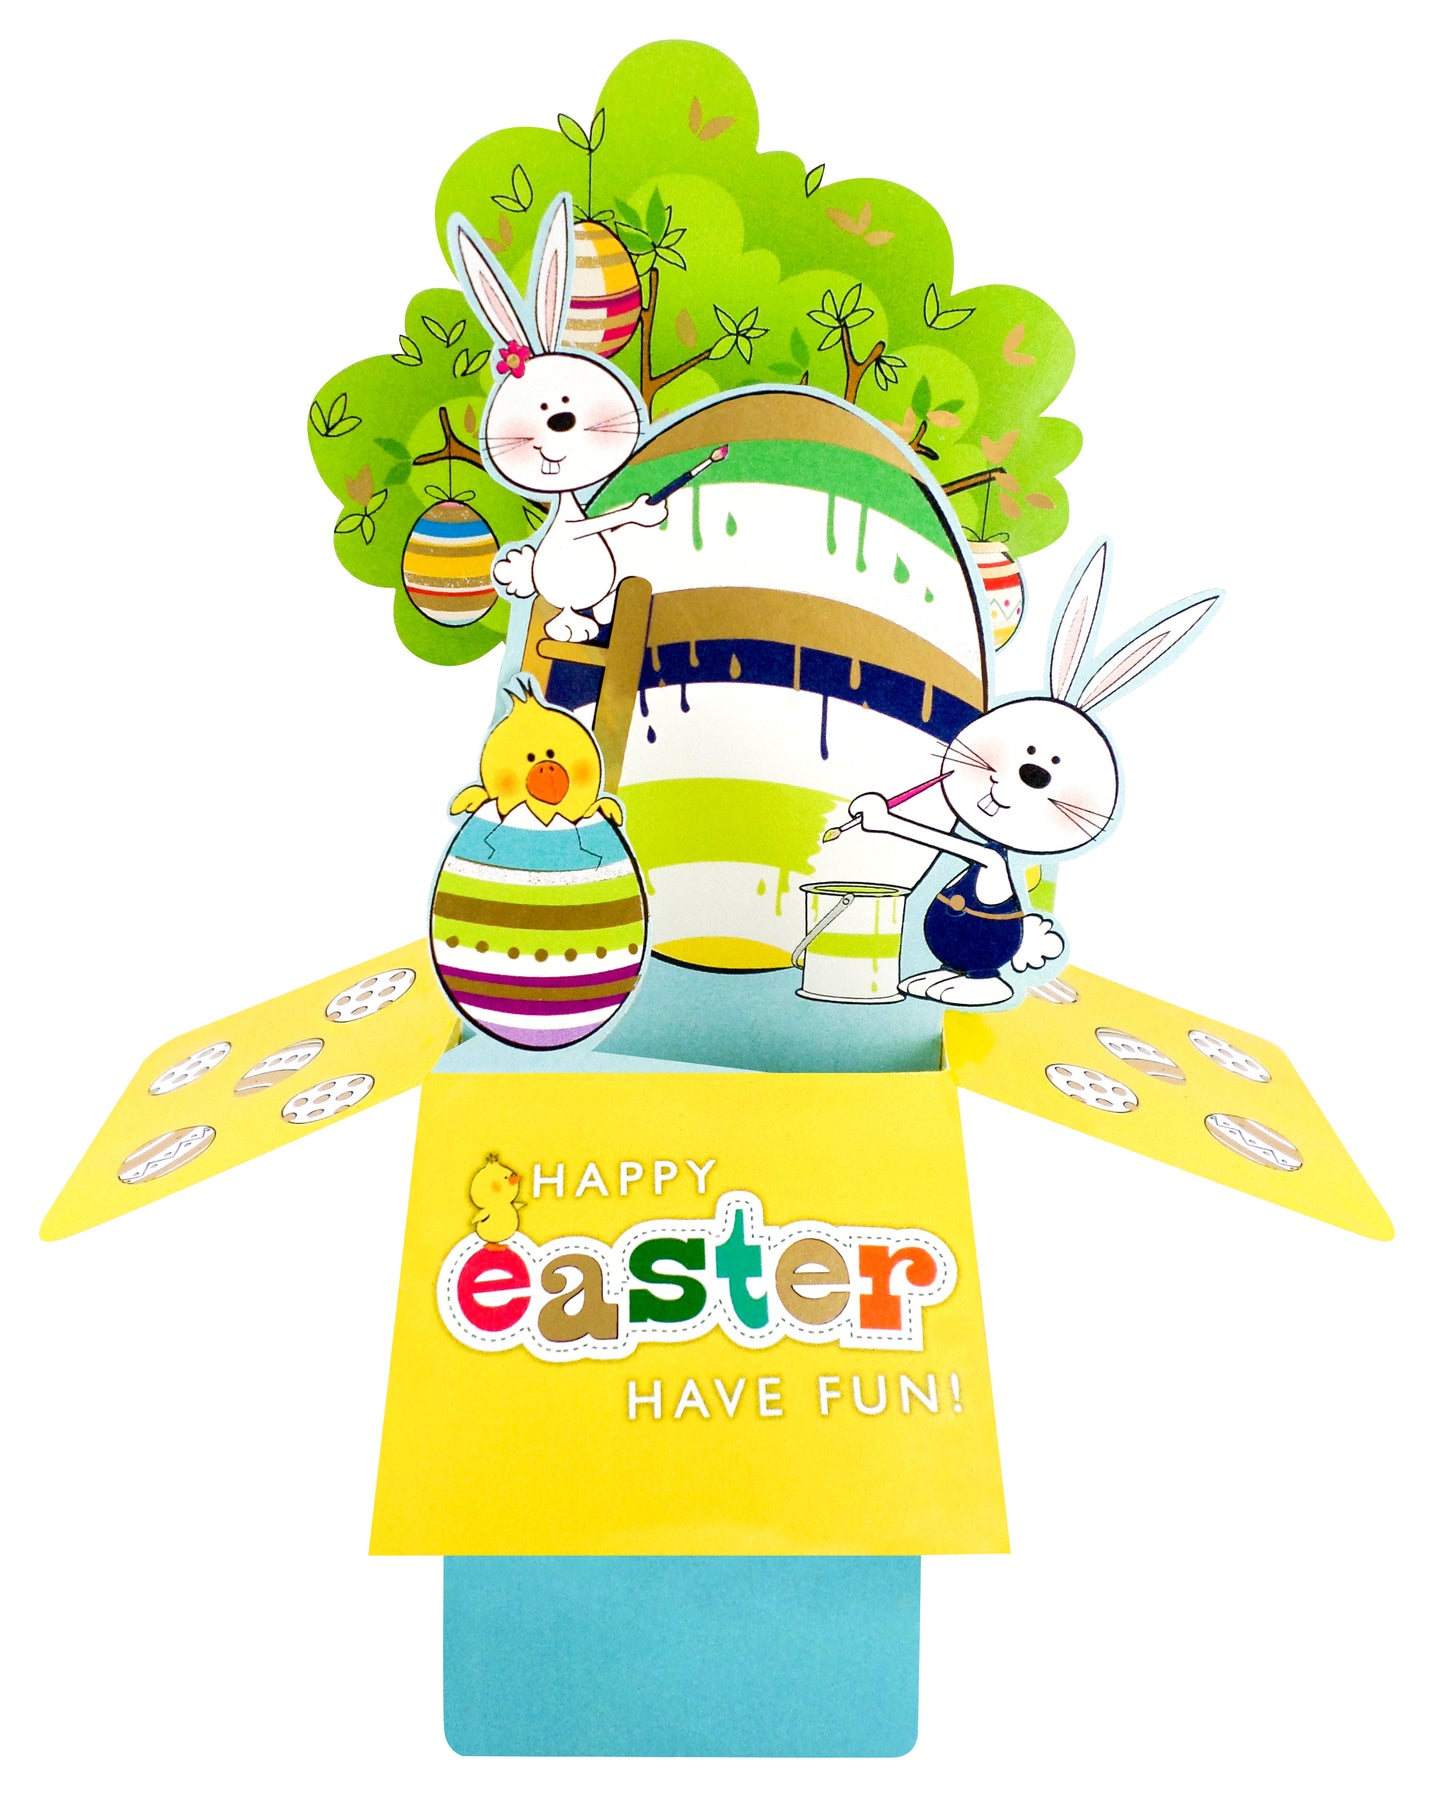 Clever Cube Easter Fun Eggstraordinary Pop Up Easter Greeting Card